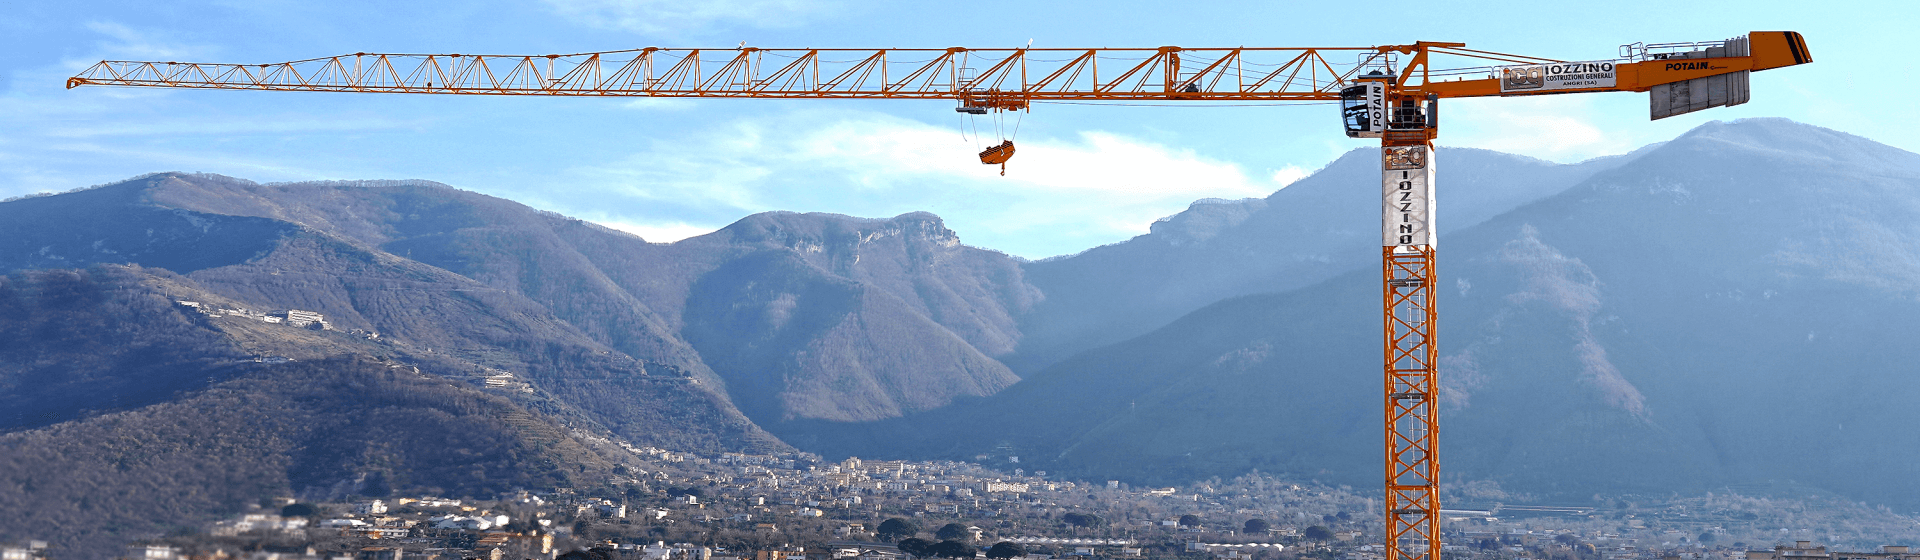 Largest-Grove-all-terrain-crane-assembles-Potain-tower-crane-for-roof-repairs-at-Italian-tomato-processing-plant-01.png